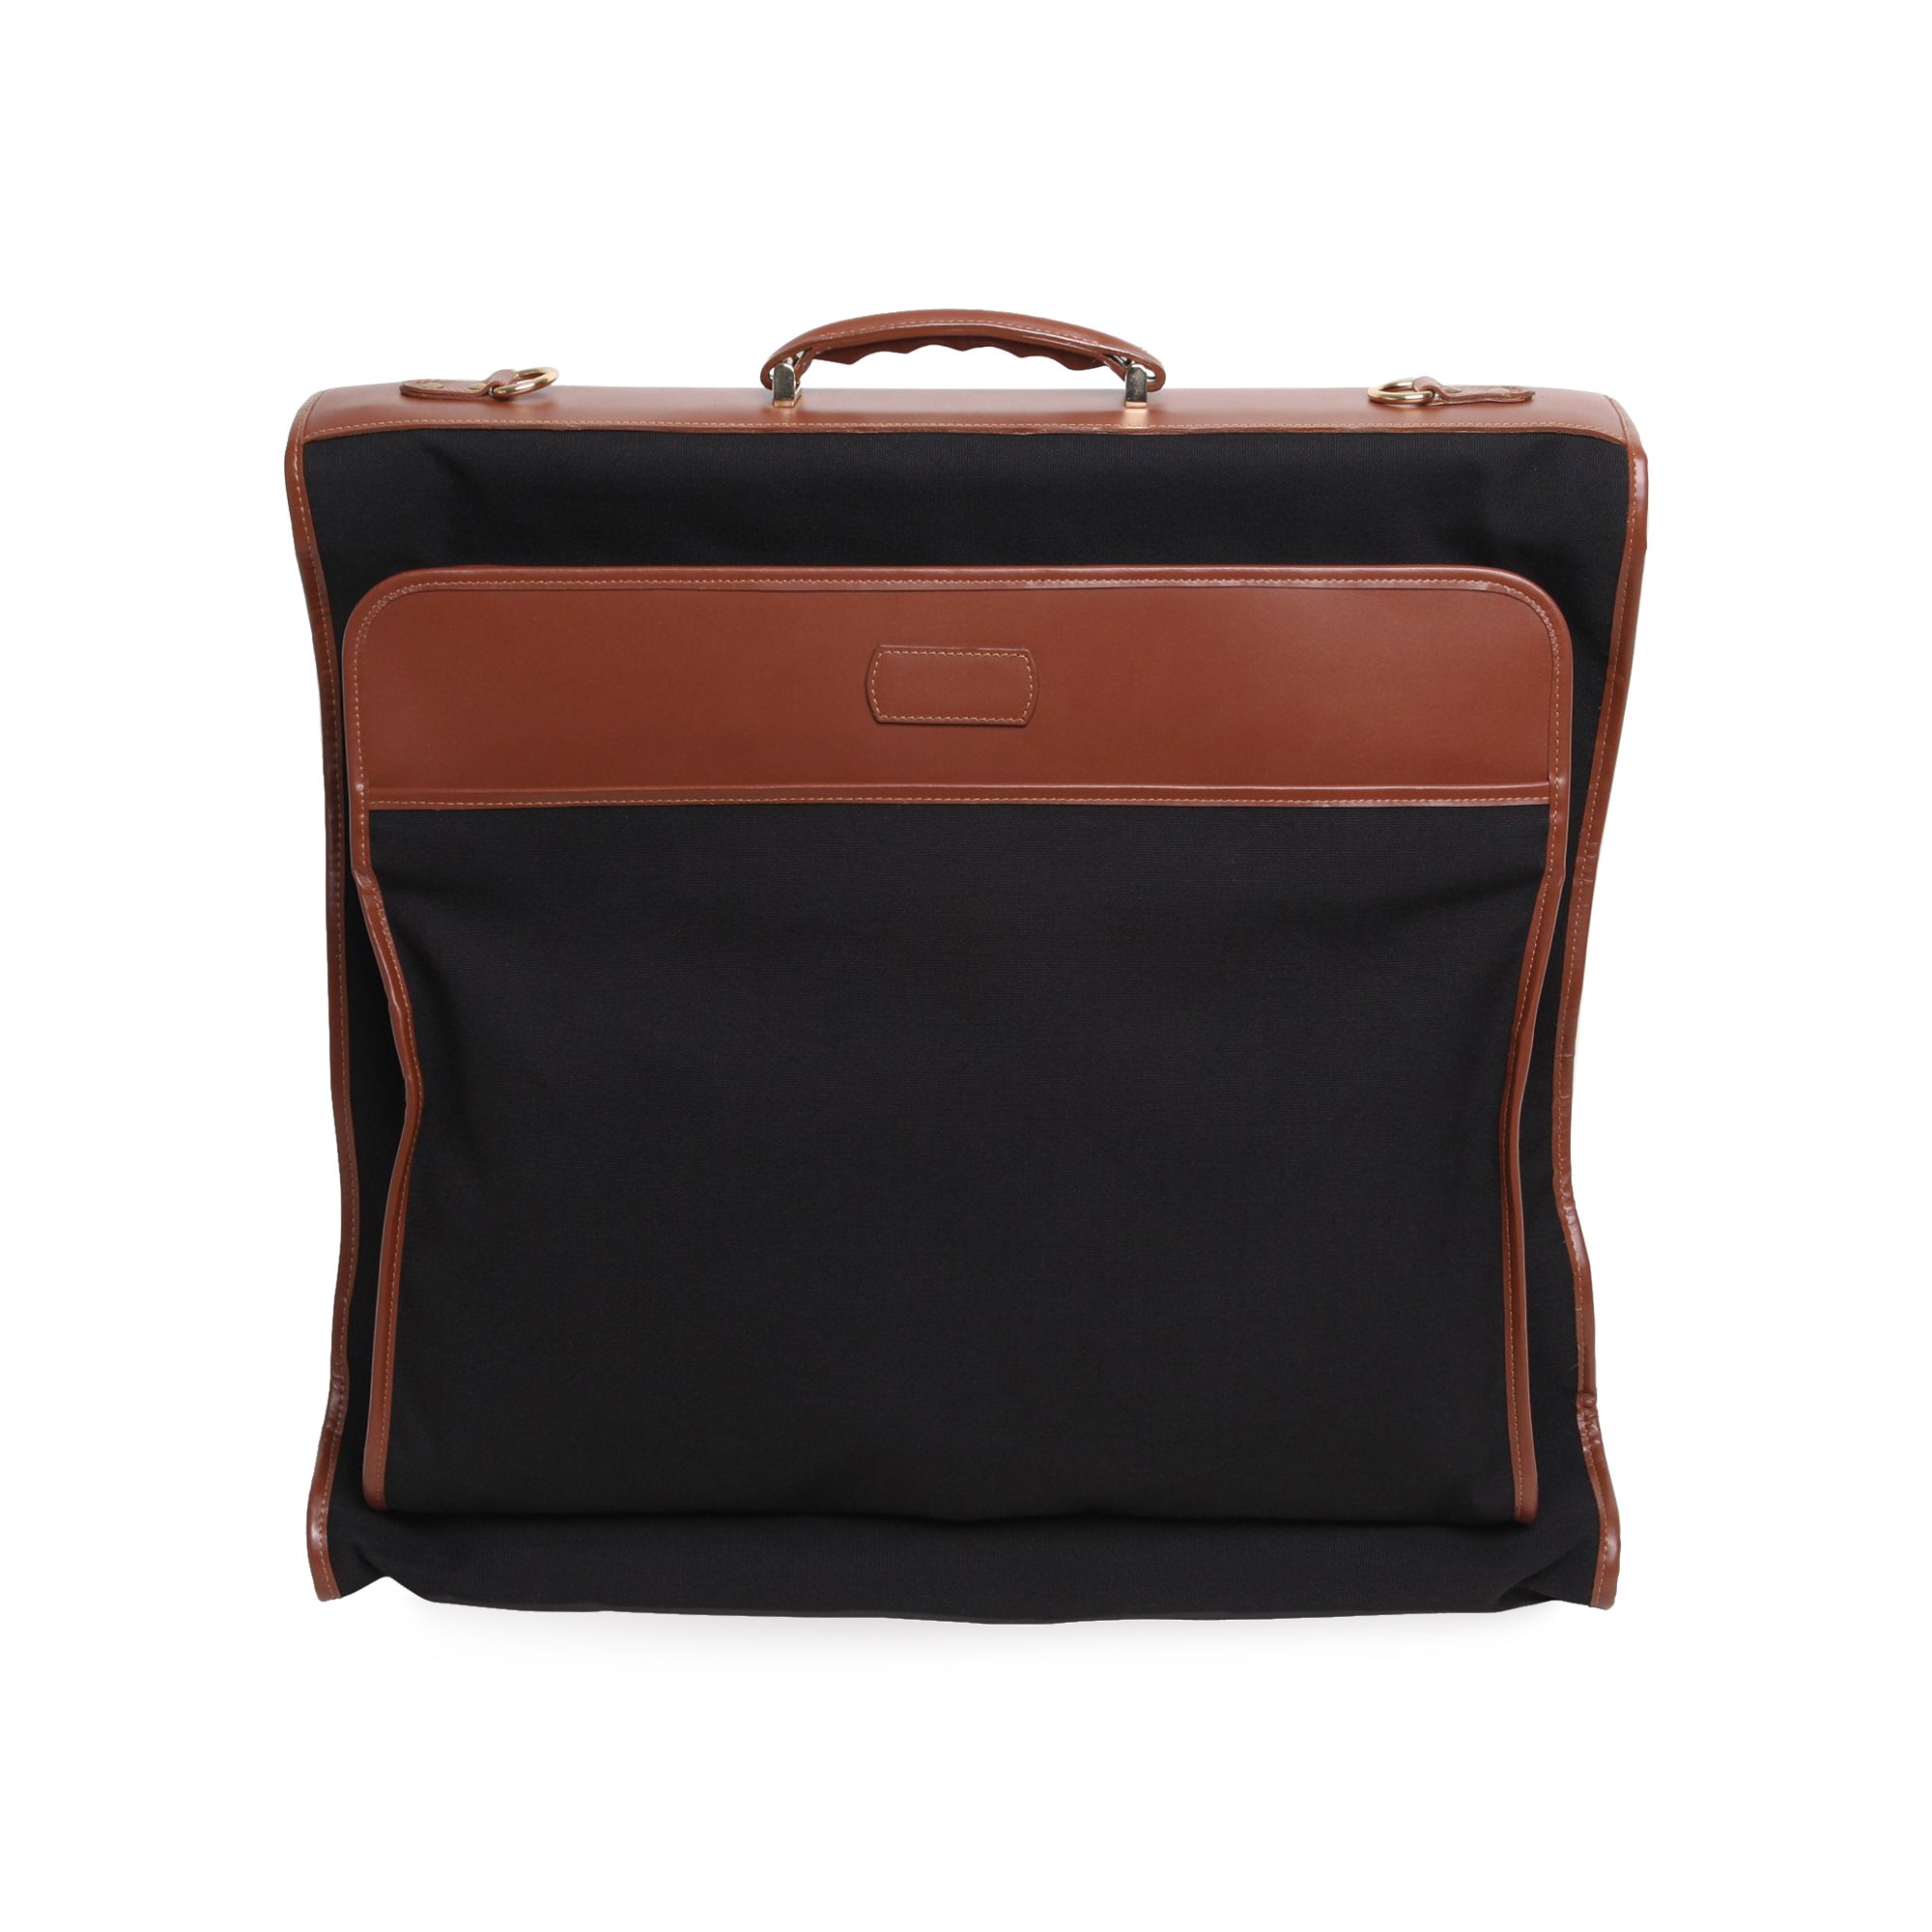 The 14 Best Carry-On Garment Bags for Travel [Suits, Dresses, Shirts]